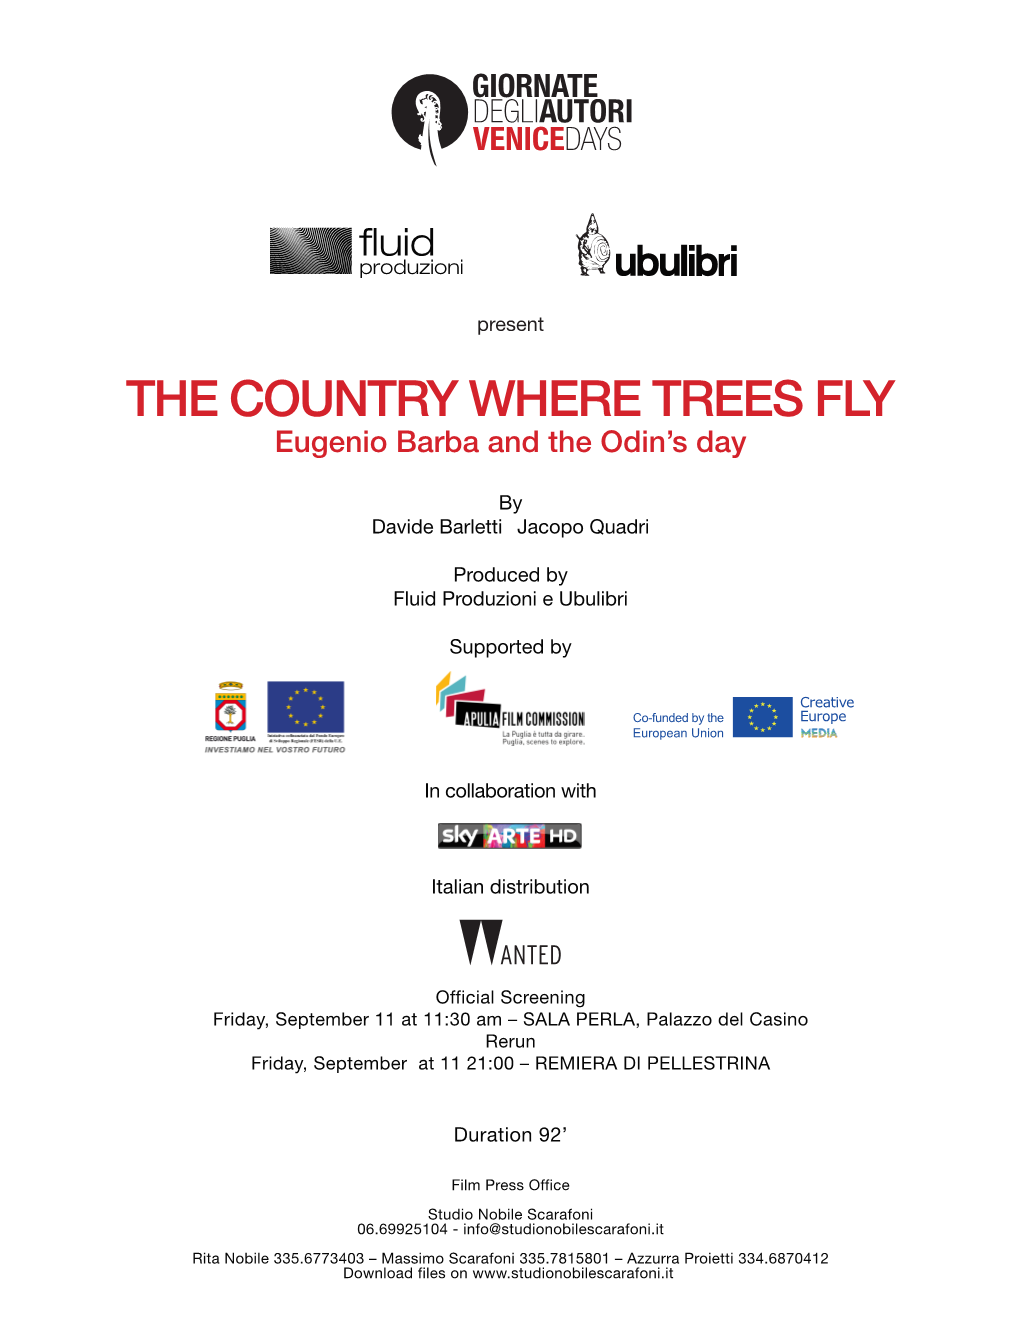 THE COUNTRY WHERE TREES FLY Eugenio Barba and the Odin’S Day